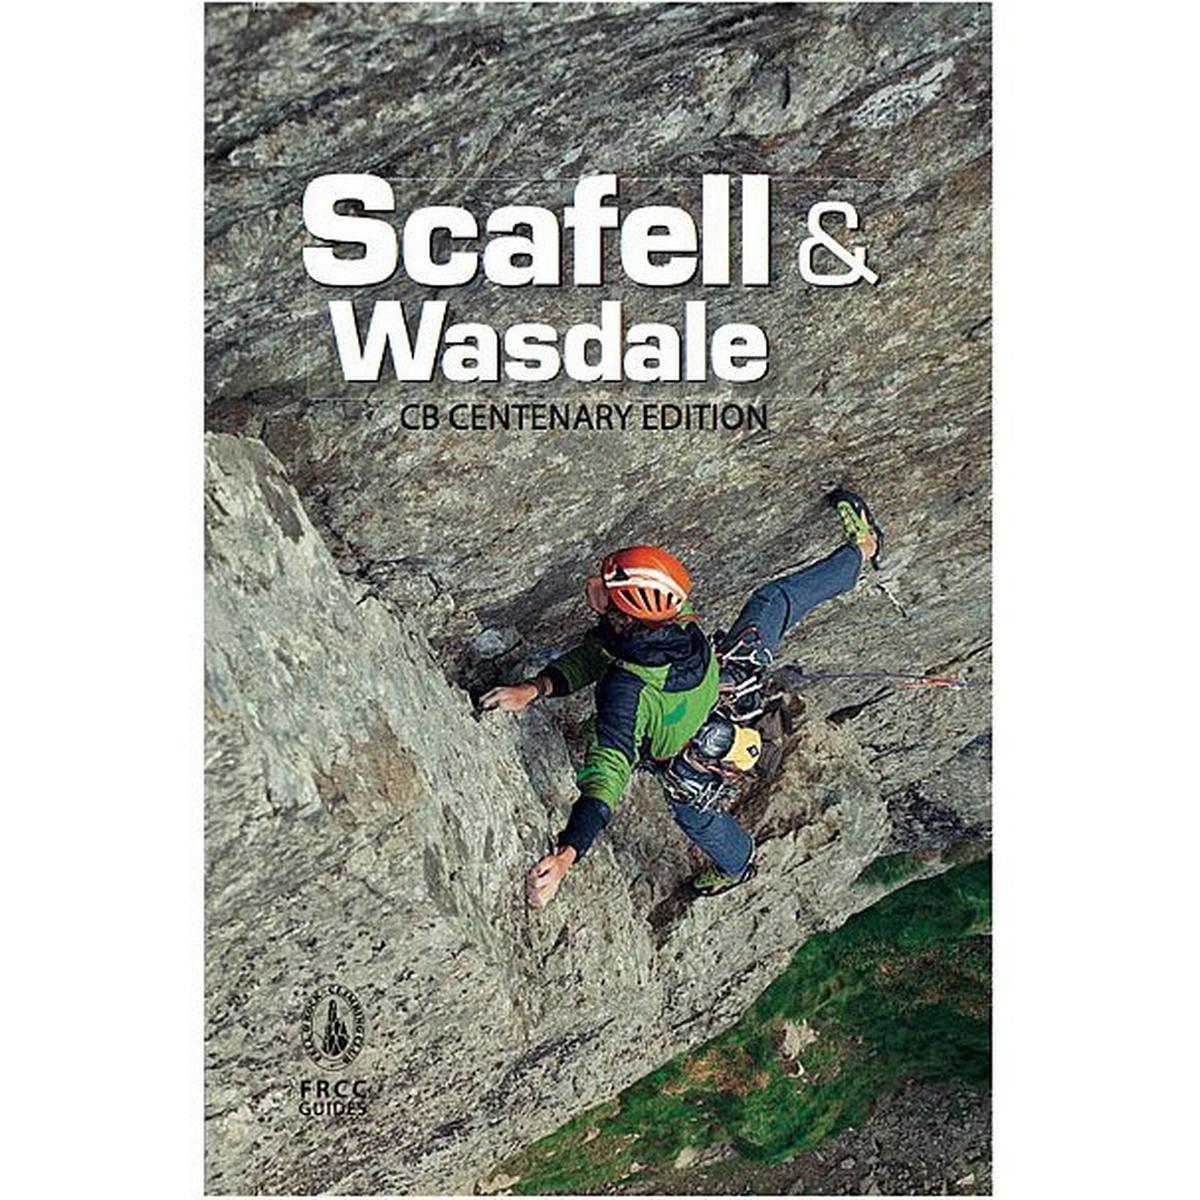 Cordee FRCC Climbing Guide Book: Scafell & Wasdale